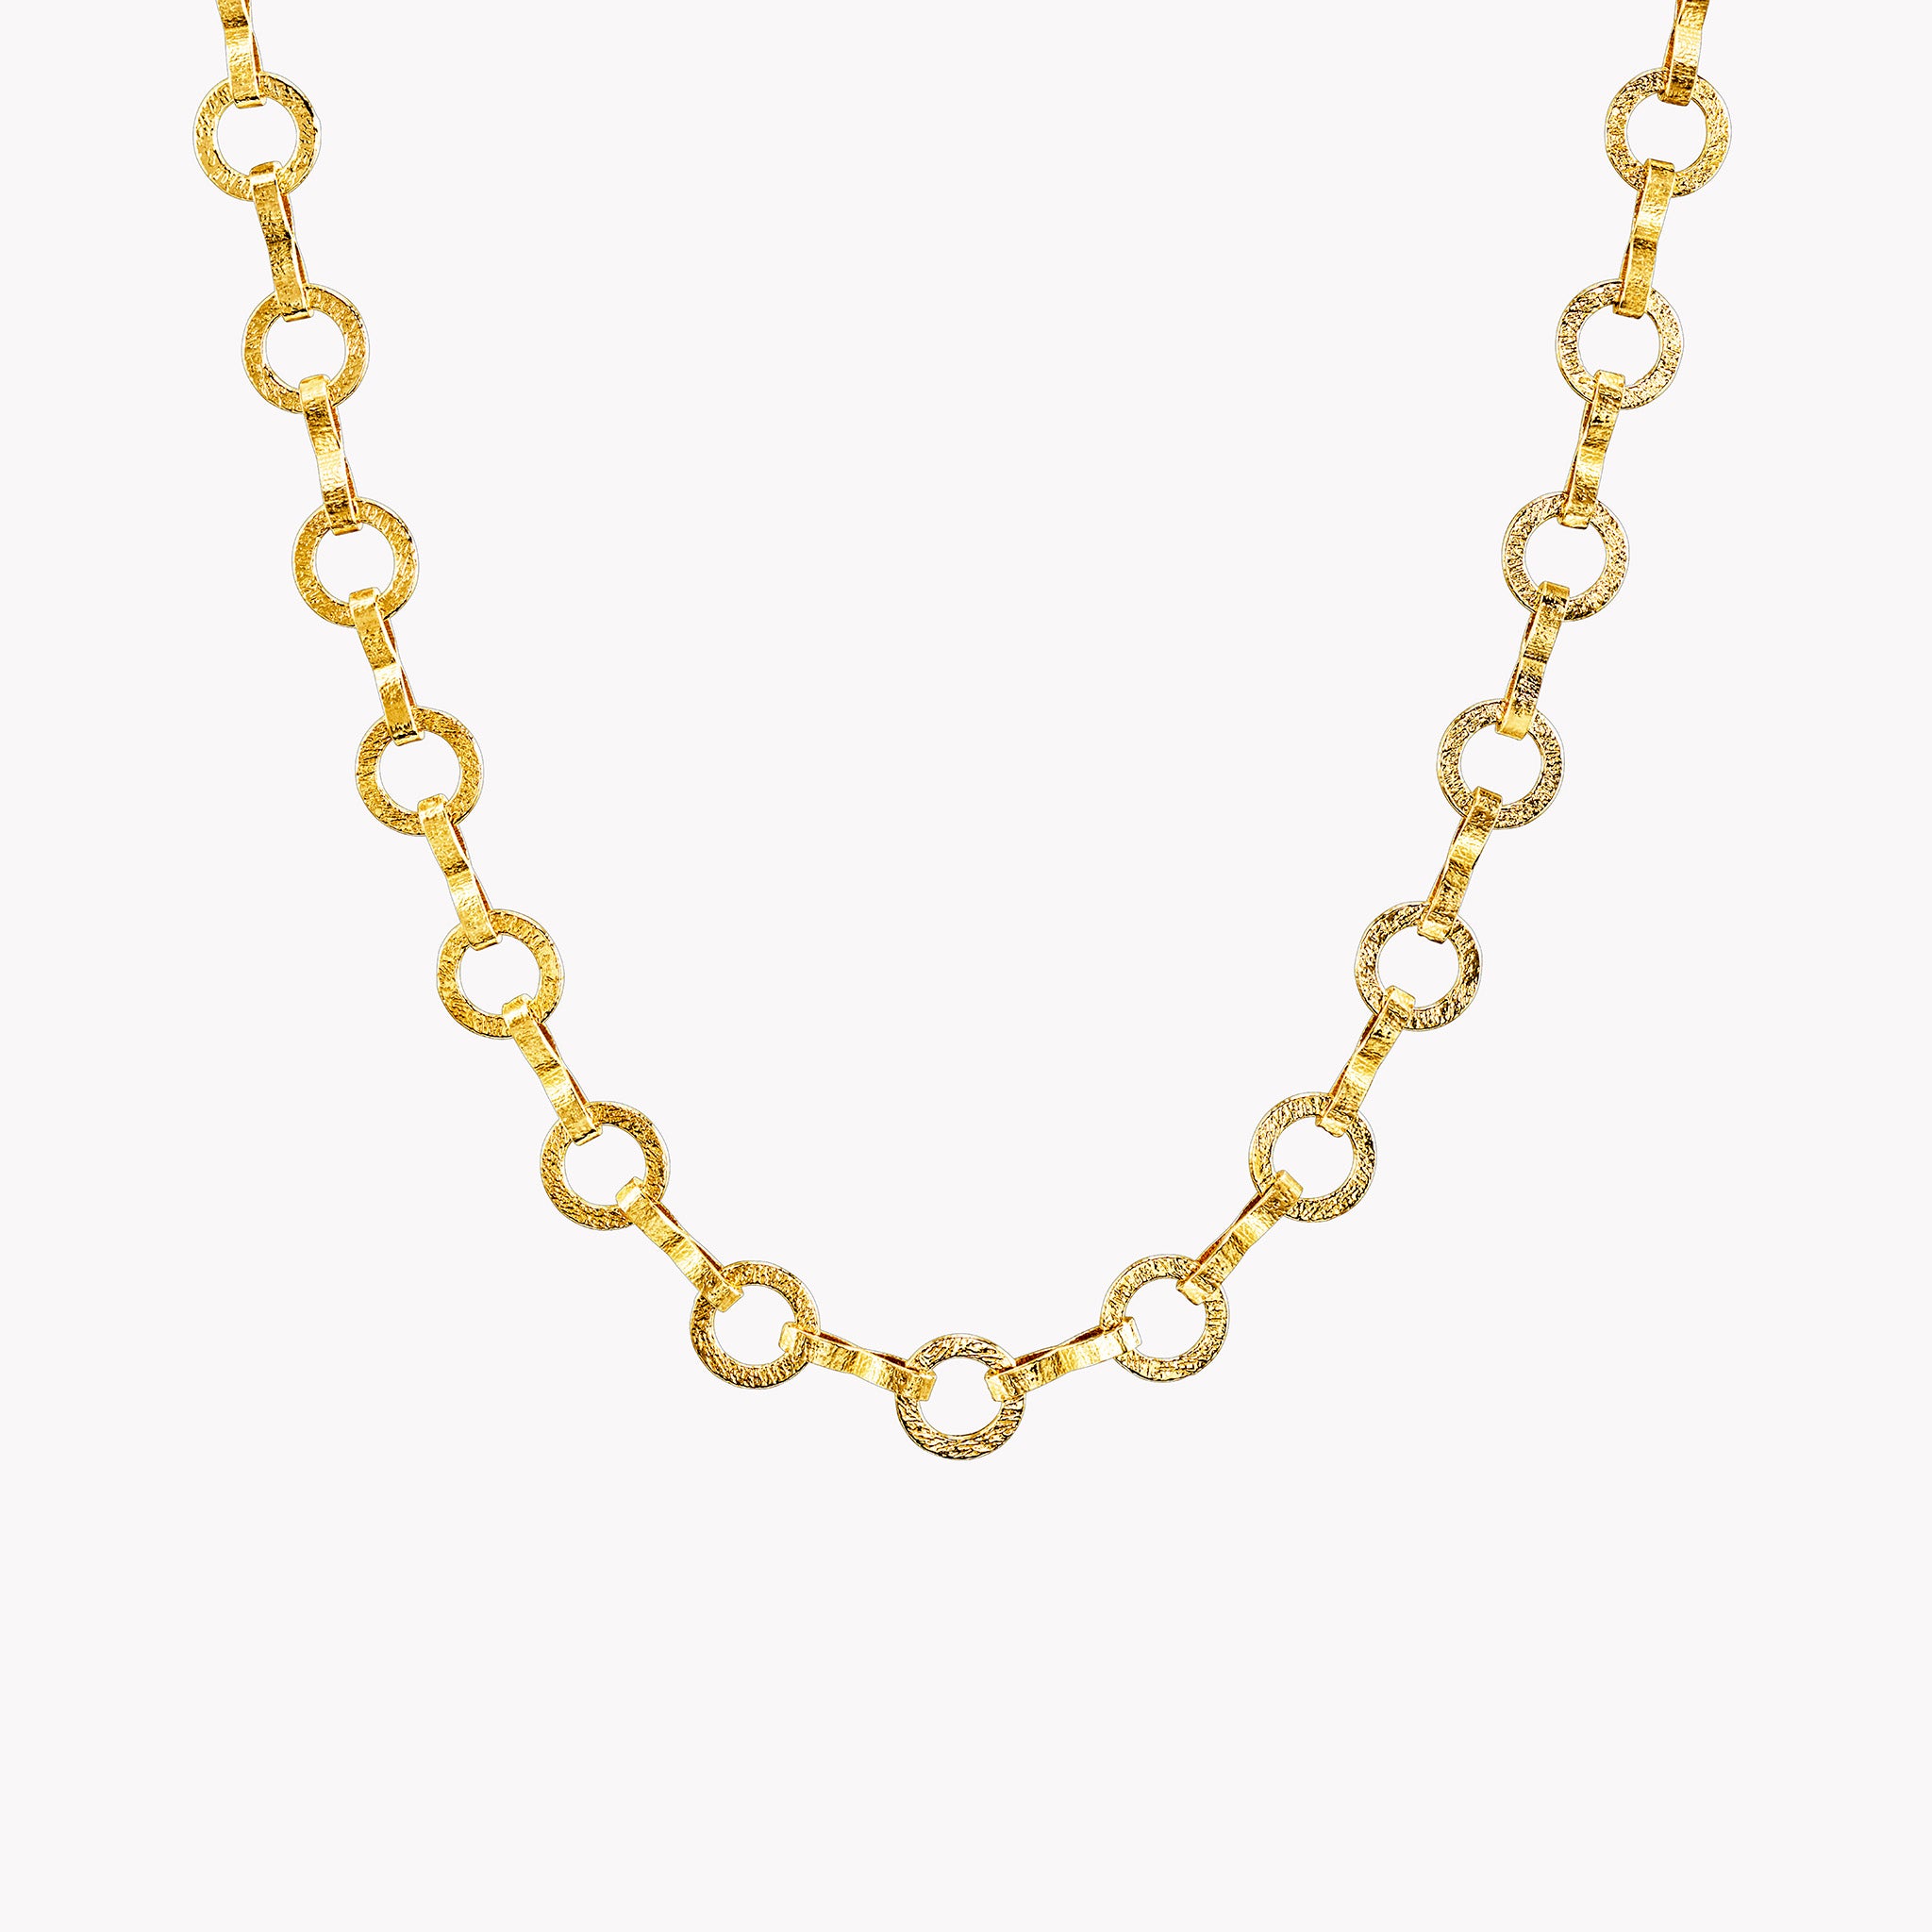 HEAVY LARGE CIRCLE LINK TEXTURED CHAIN